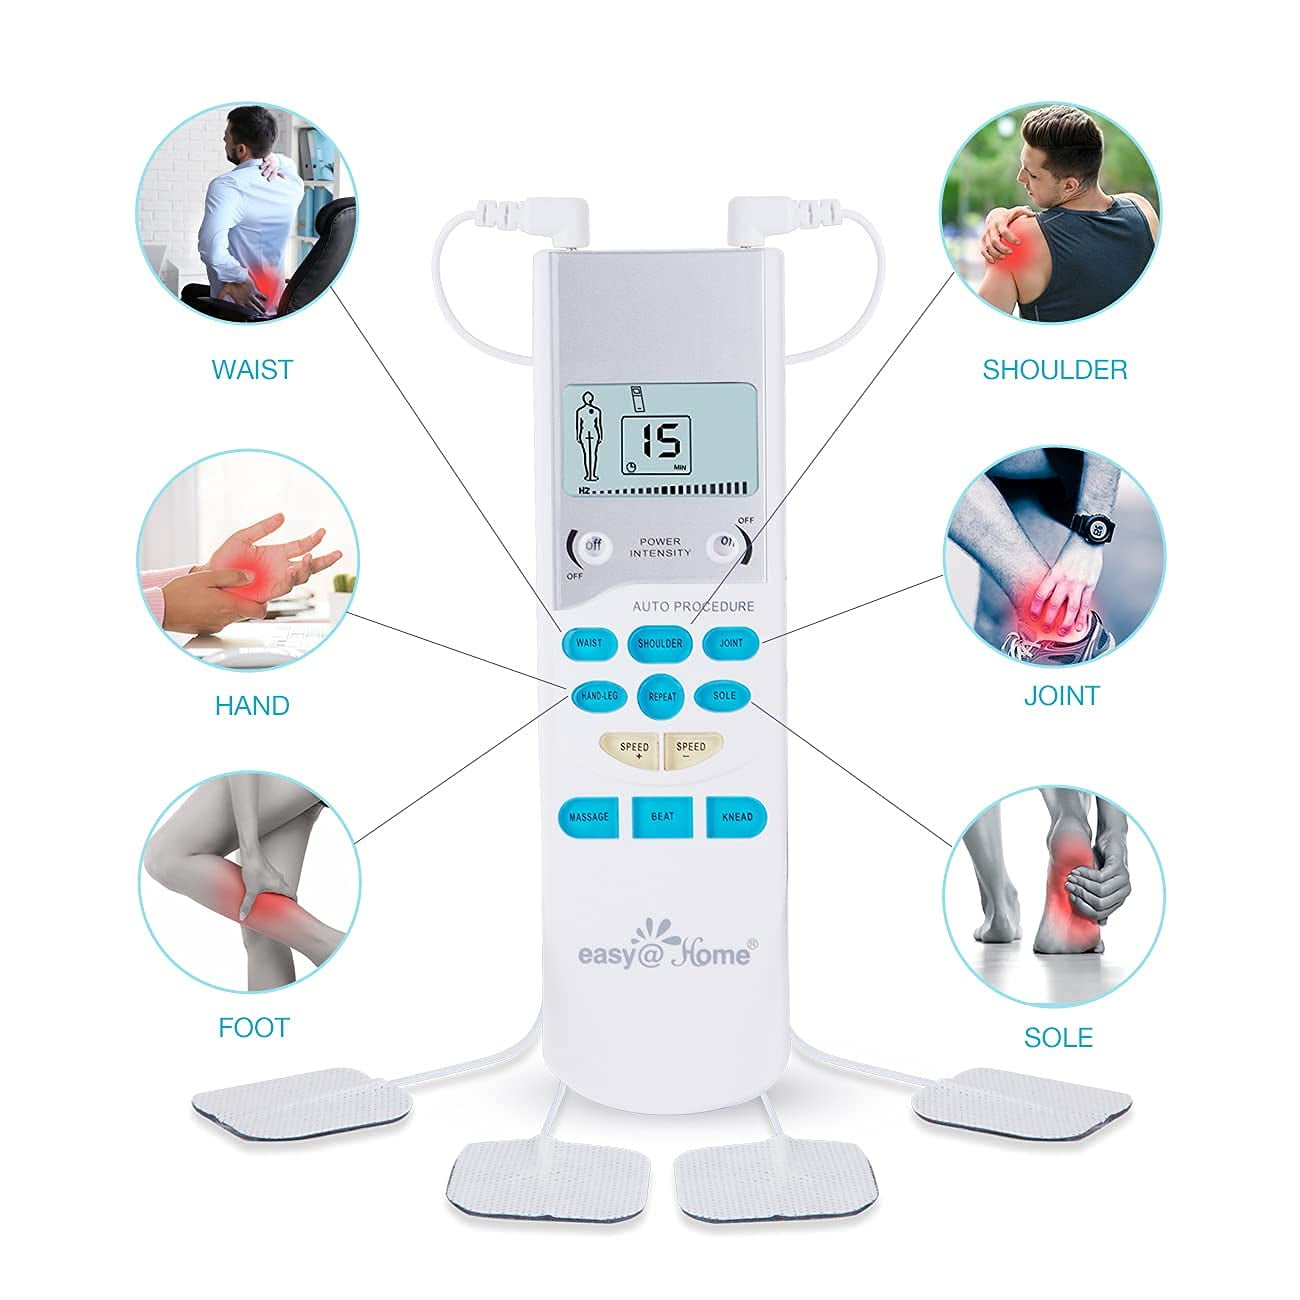 Easy@Home TENS Handheld Electronic Pulse Massager Unit - EHE009 (Muscle  Pain Relief Stimulator) 